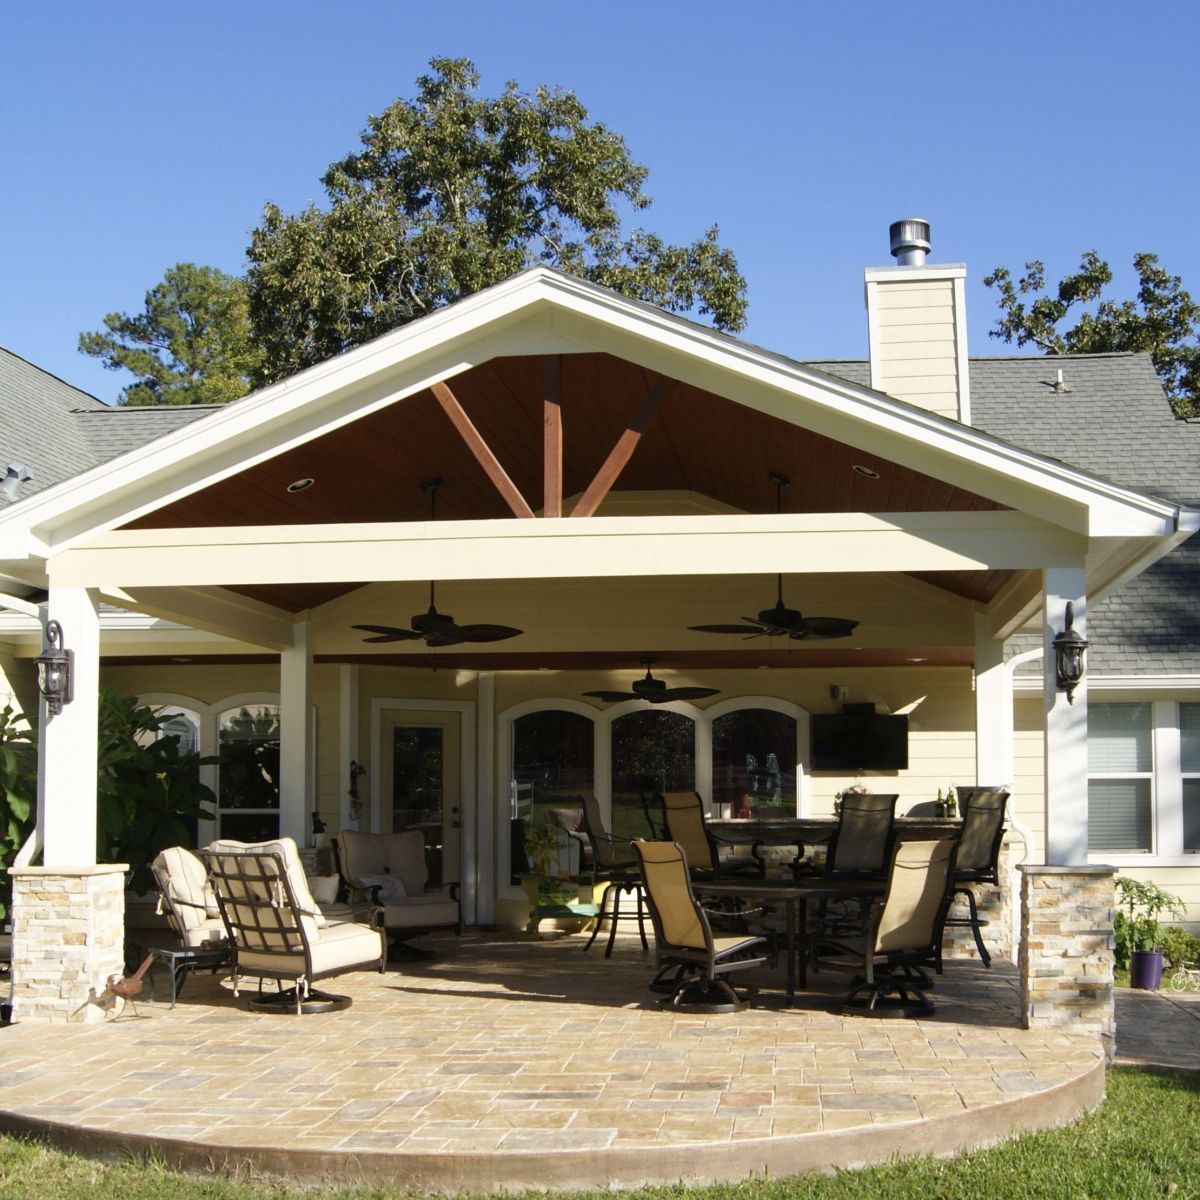 Backyard porch ideas on a budget patio makeover outdoor spaces coolest ...